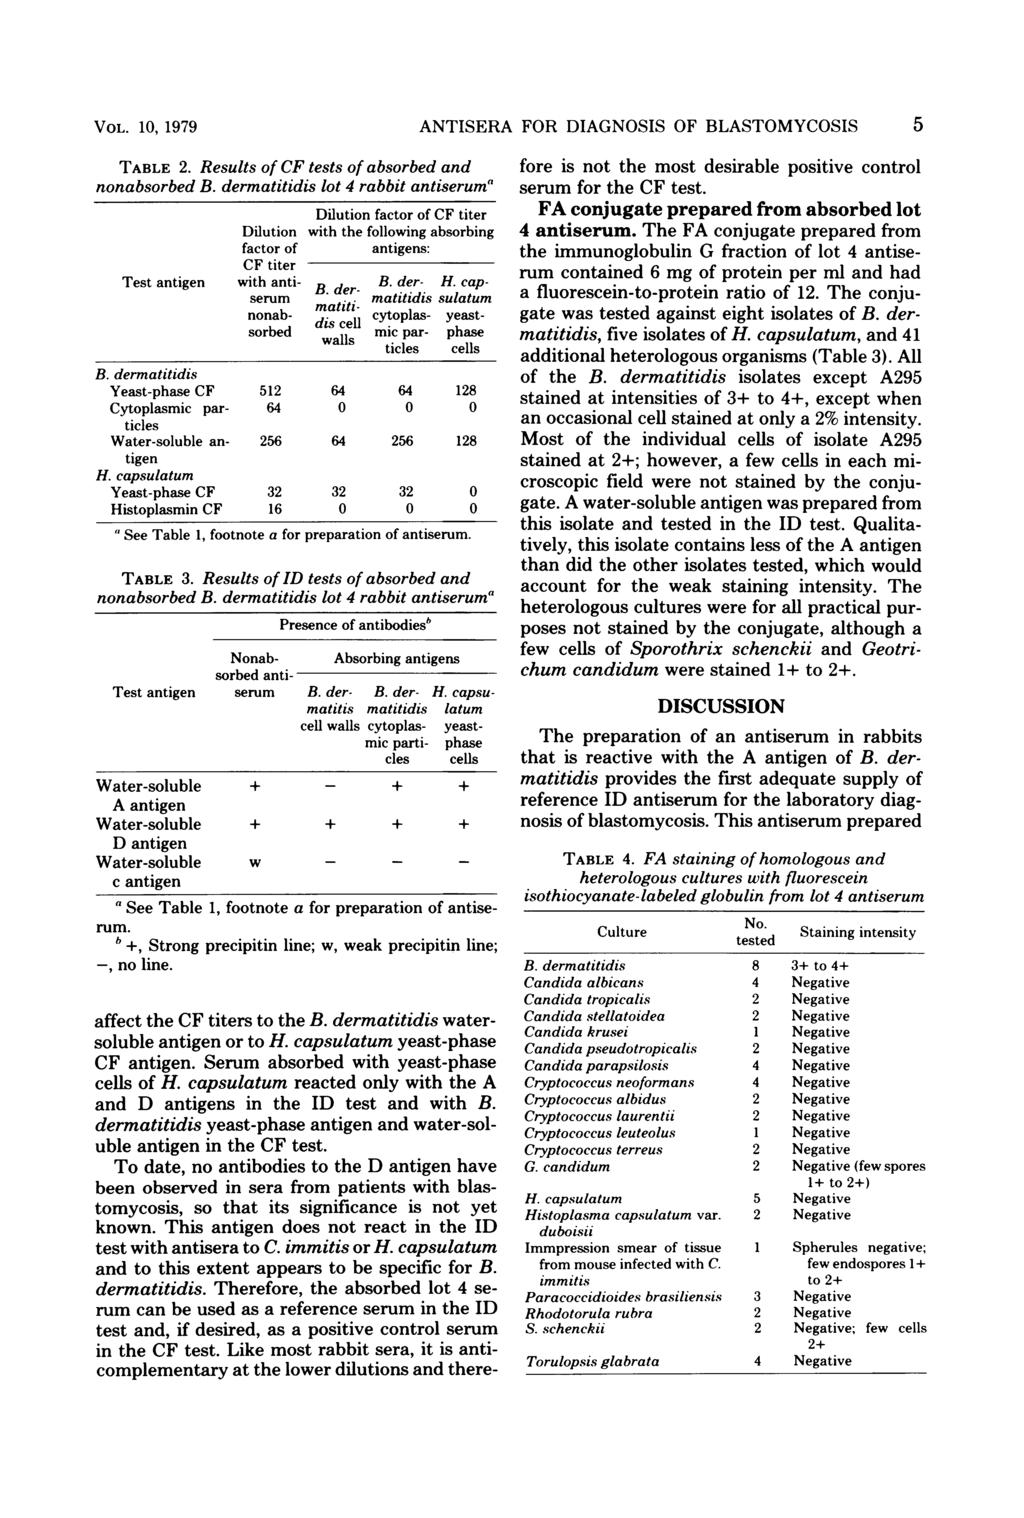 VOL. 10, 1979 TABLE 2. Results of CF tests of absorbed and nonabsorbed B.